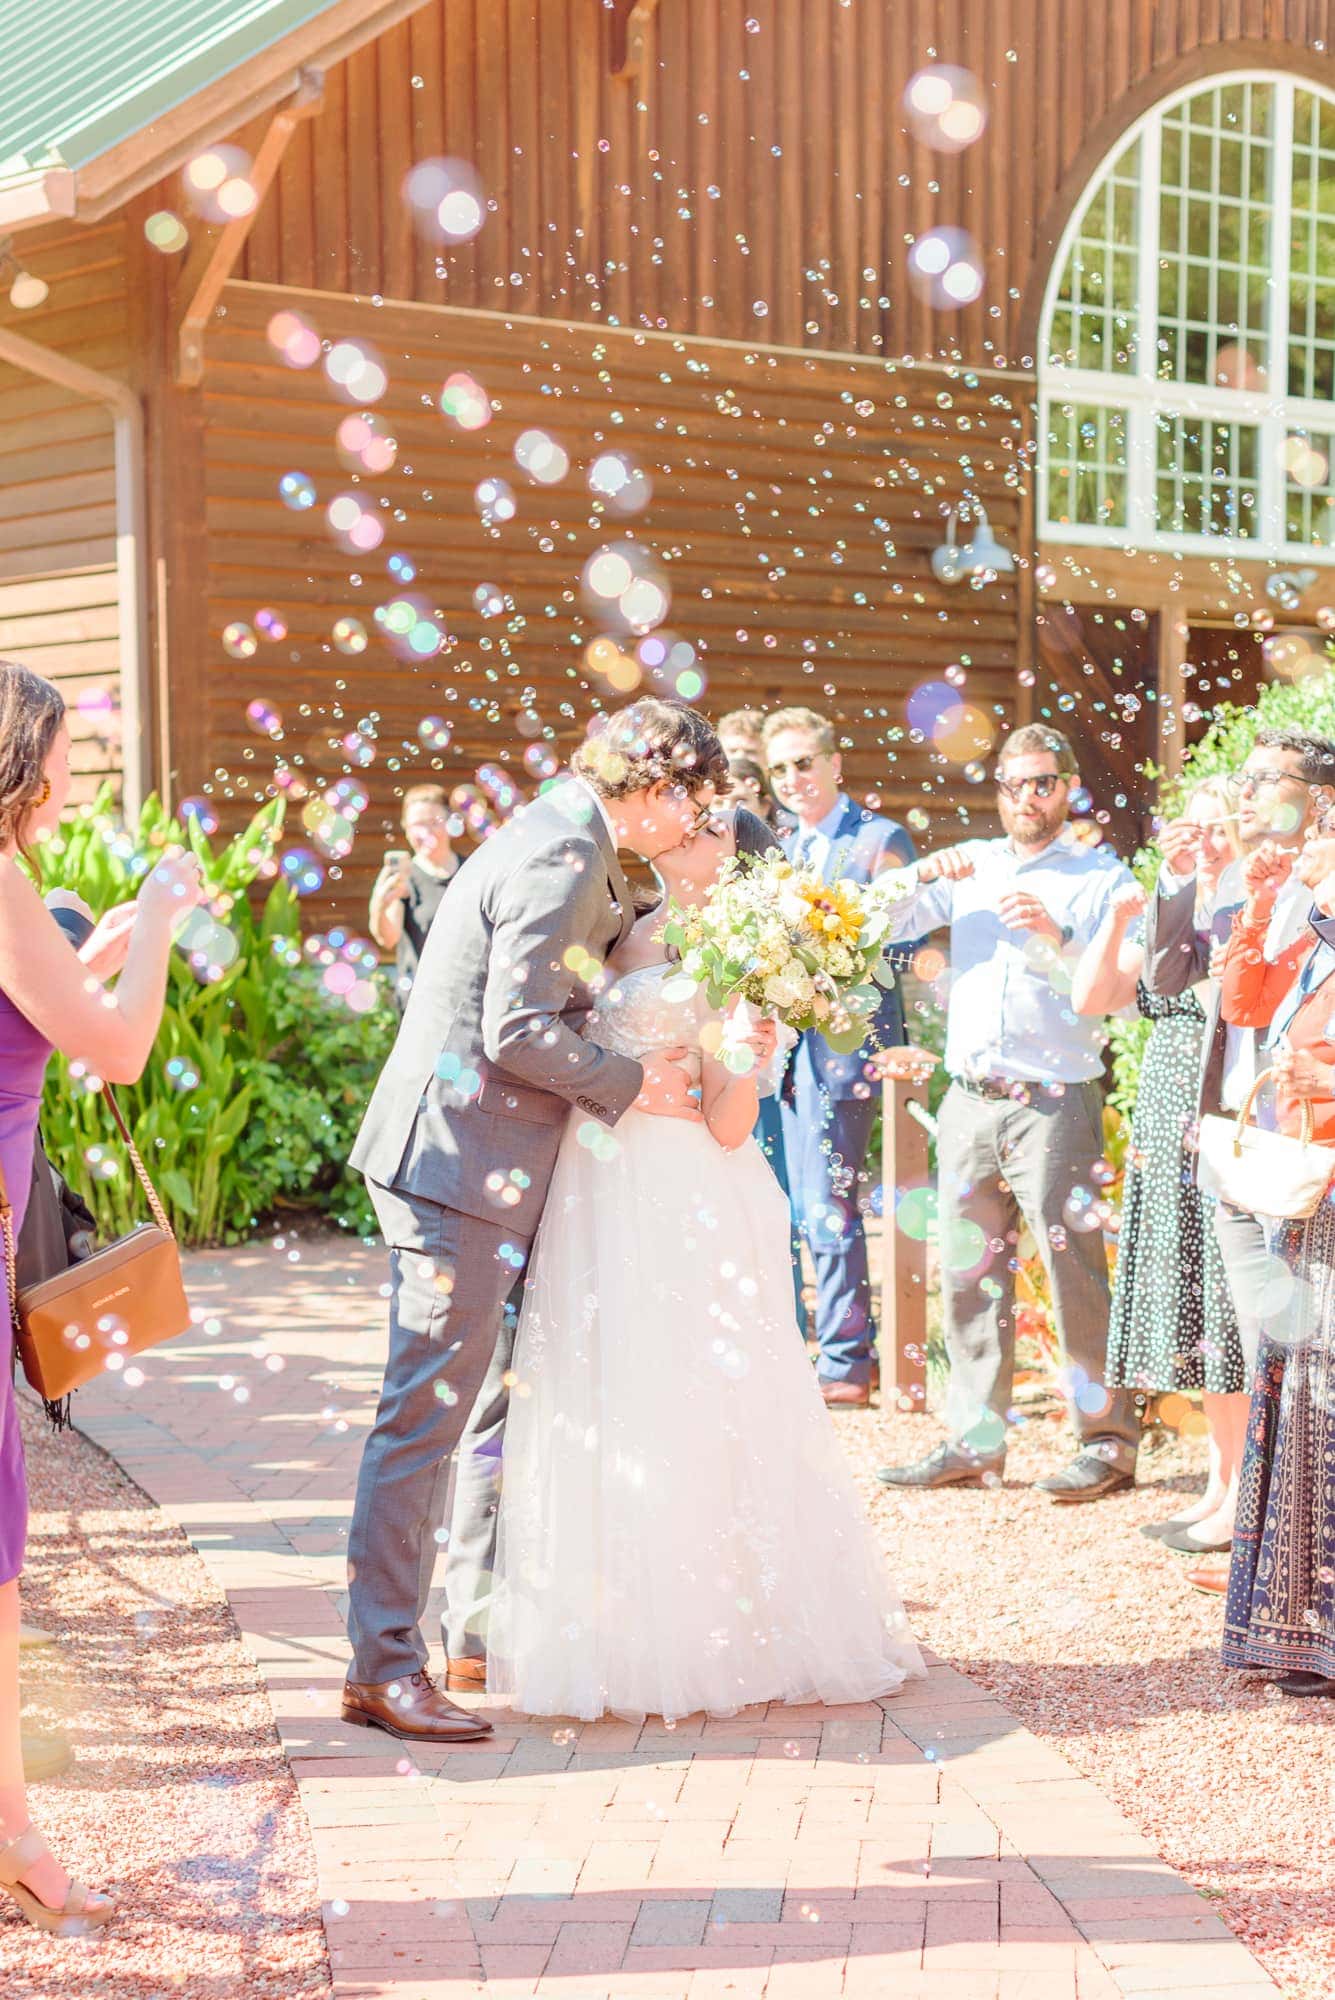 Natalie and Tommy kiss in a swarm of bubbles in front of the barn at Alexander Homestead.